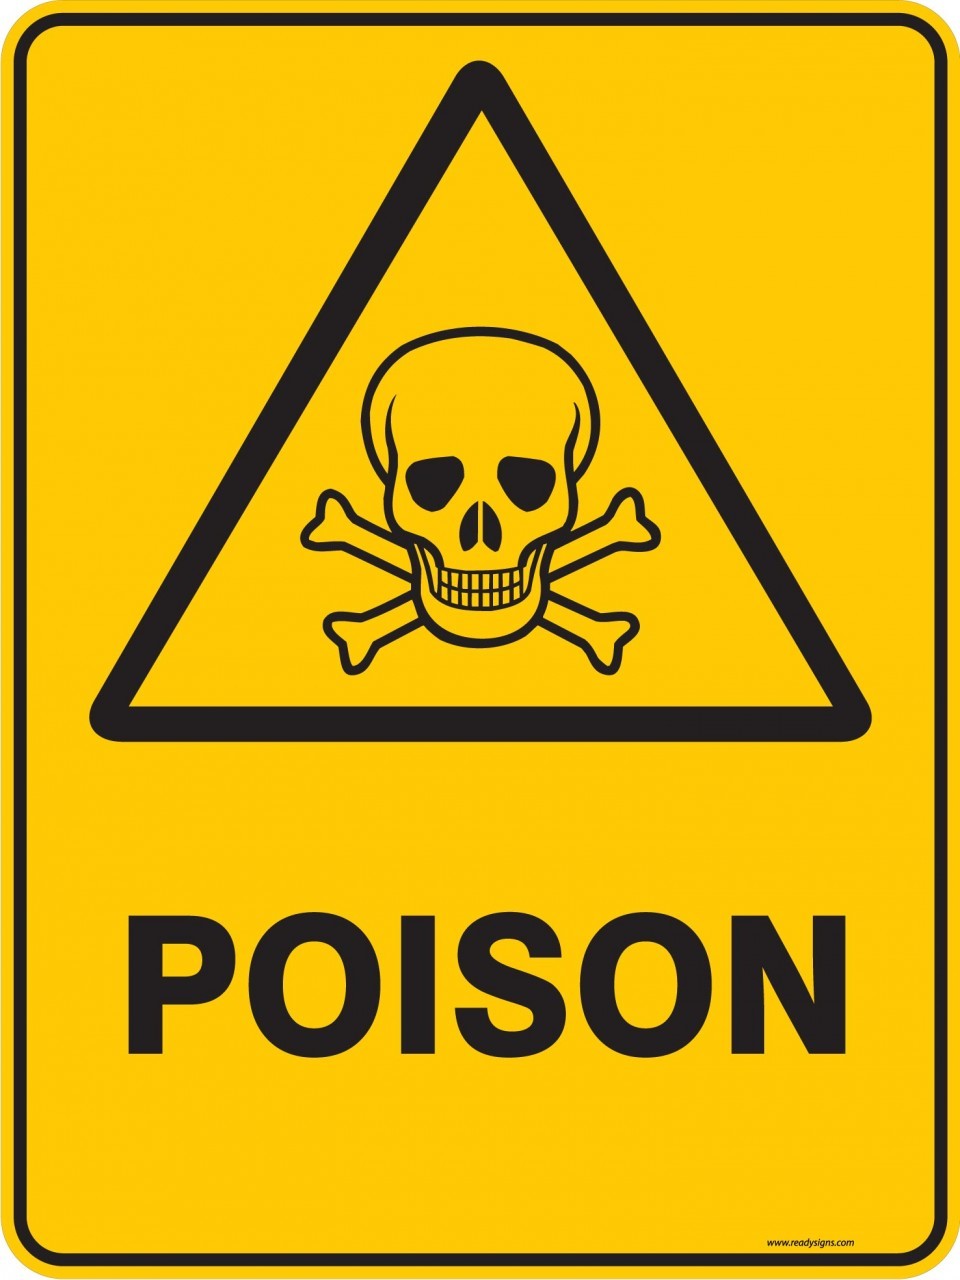 Warning Sign - POISON - Property Signs